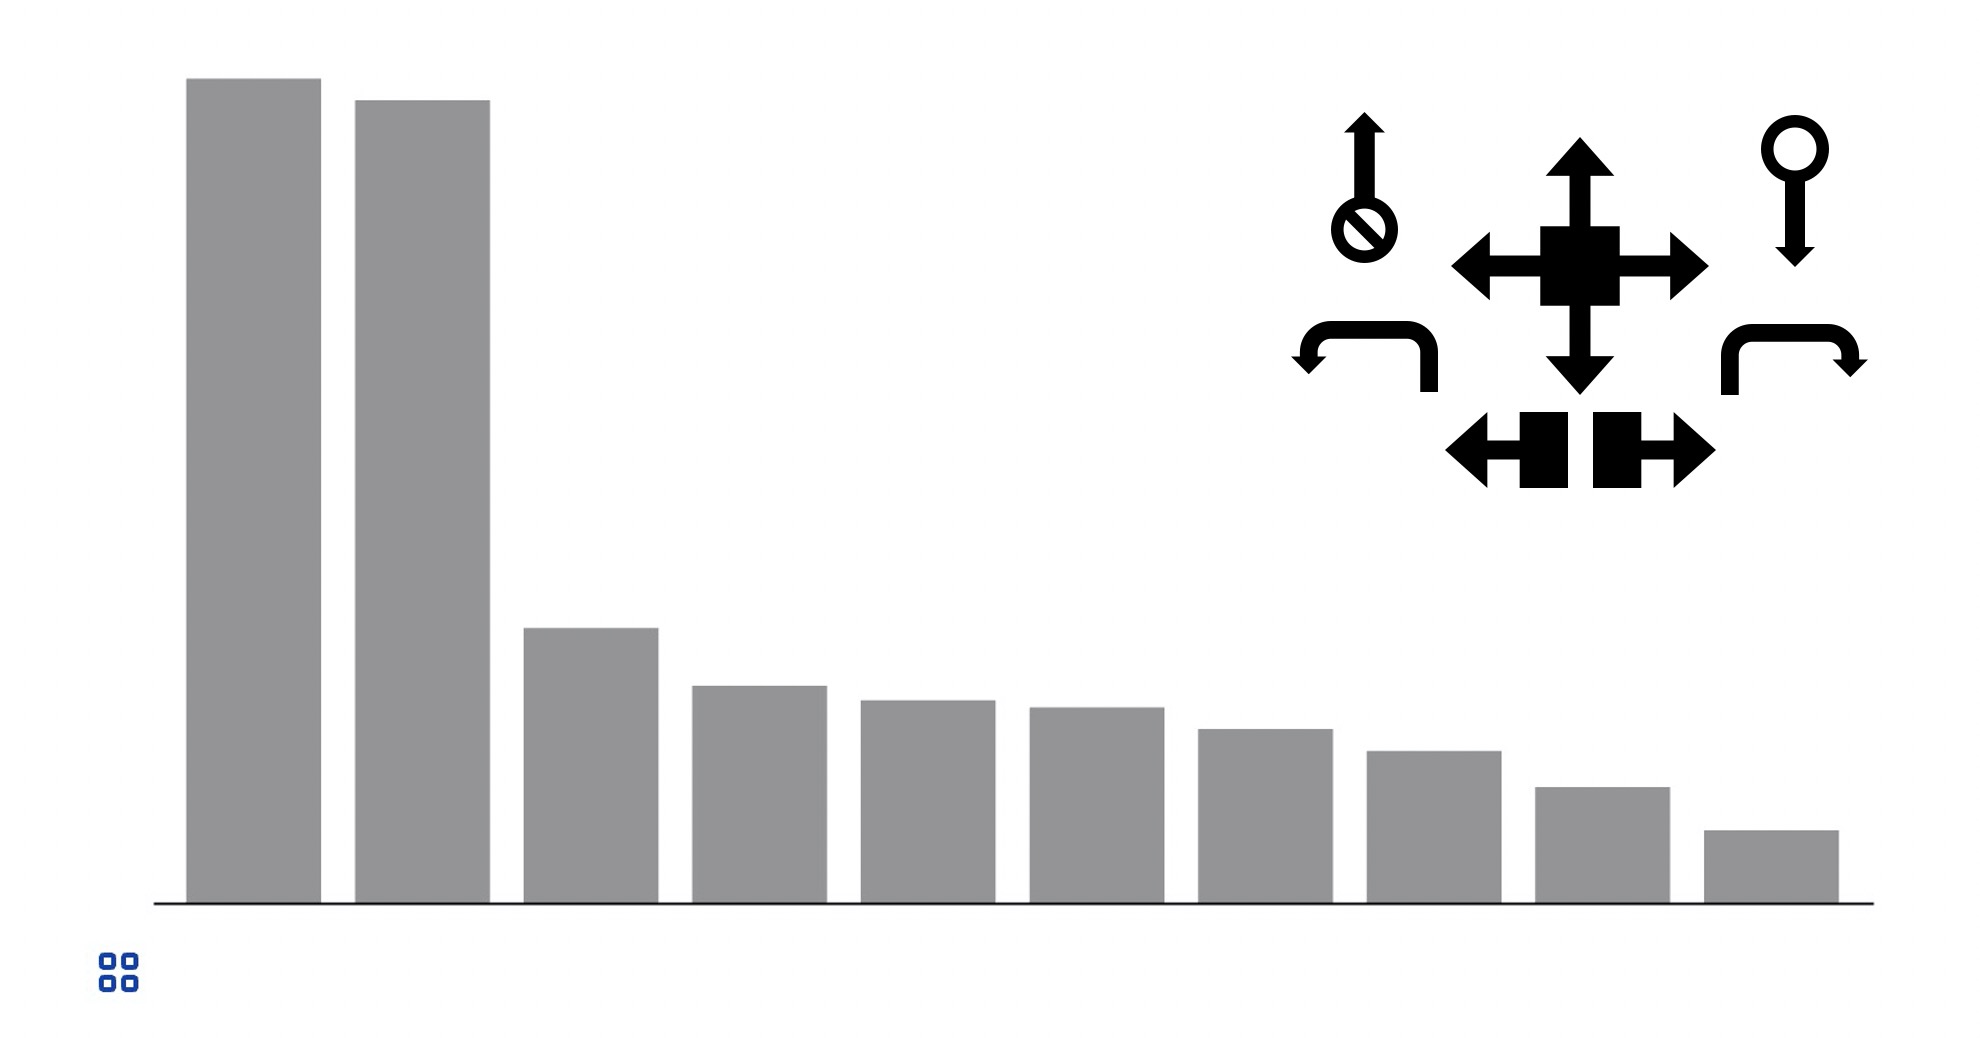 An image depicting a chart and a series of symbols that resemble controls, such as left, right, select, undo, etc.